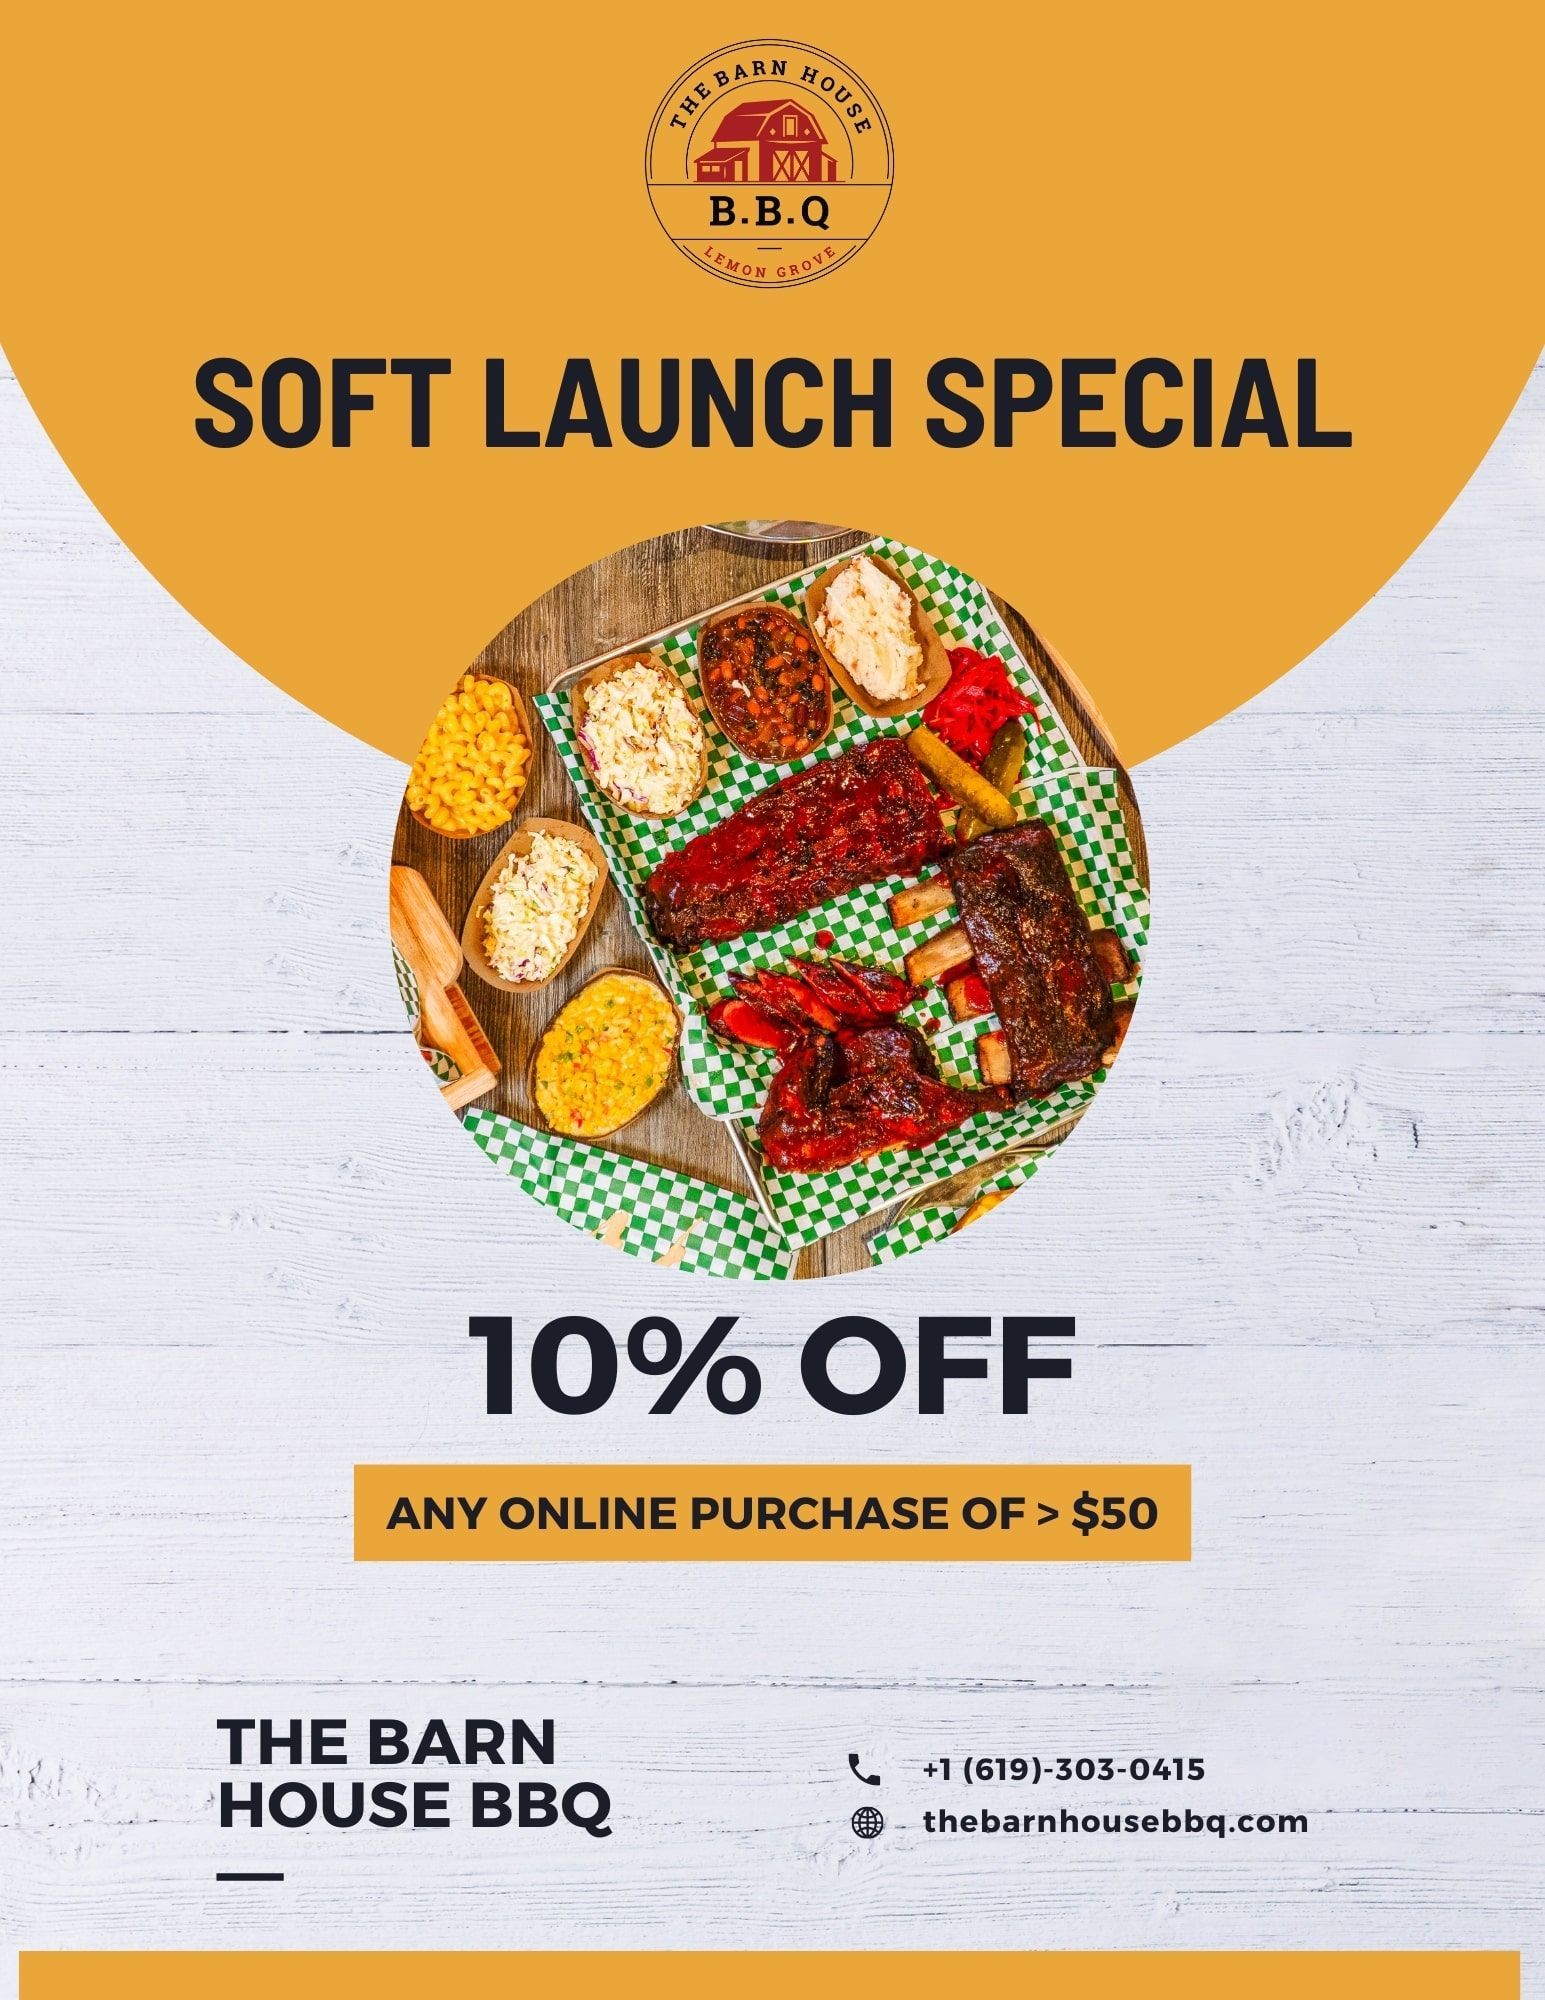 grand opening / soft launch special. 10% off any online purchase of at least $50. The Barn House BBQ sale